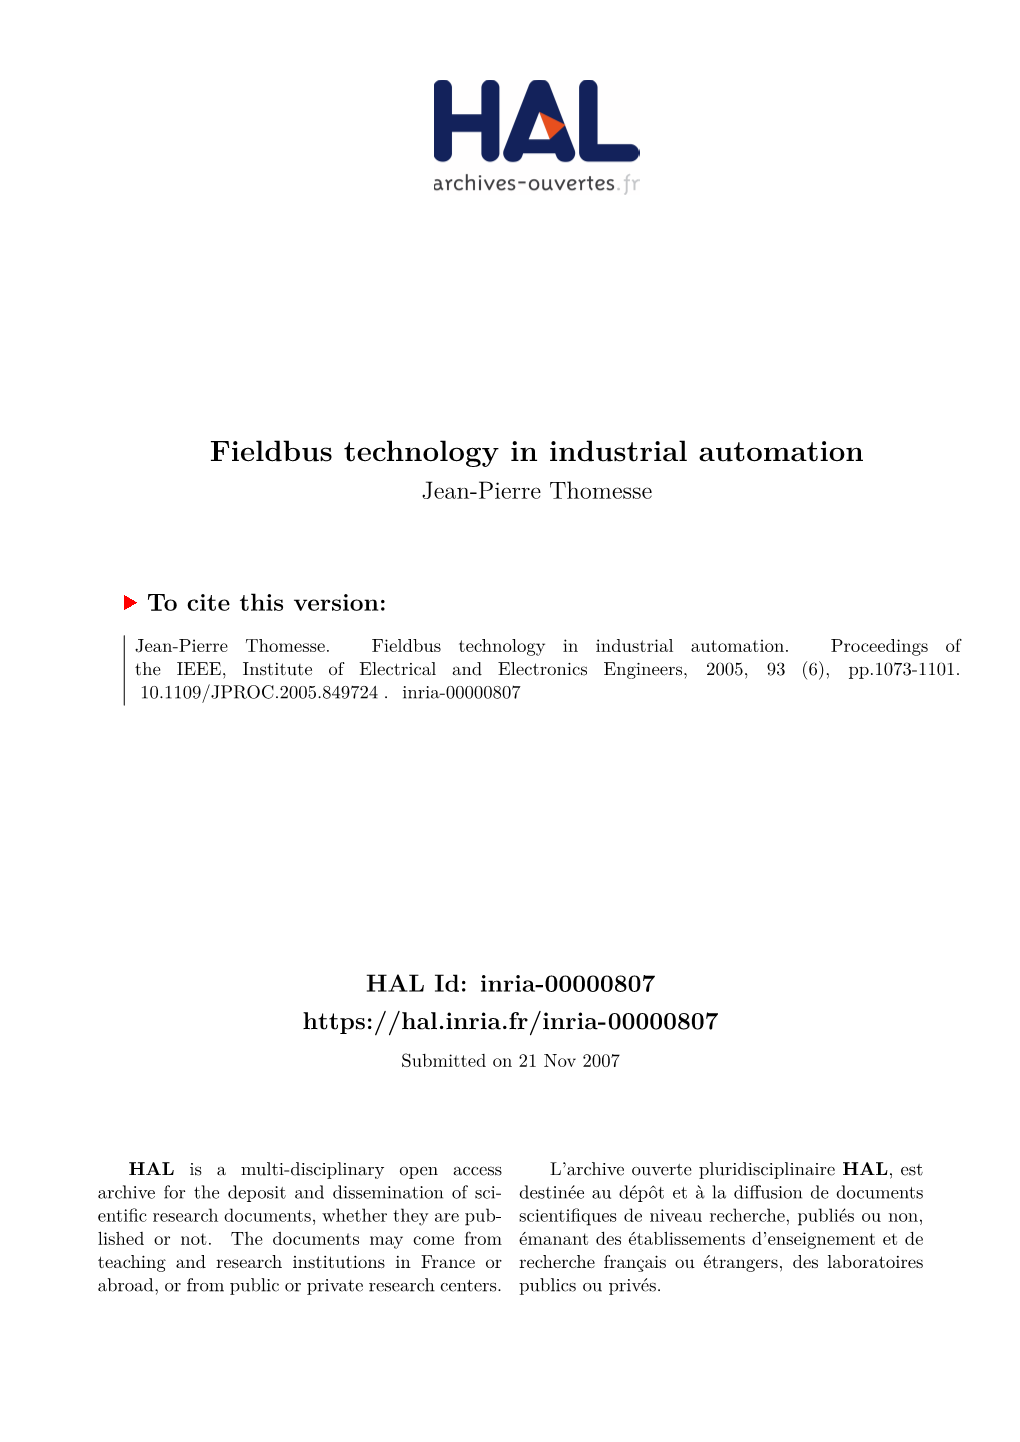 Fieldbus Technology in Industrial Automation Jean-Pierre Thomesse